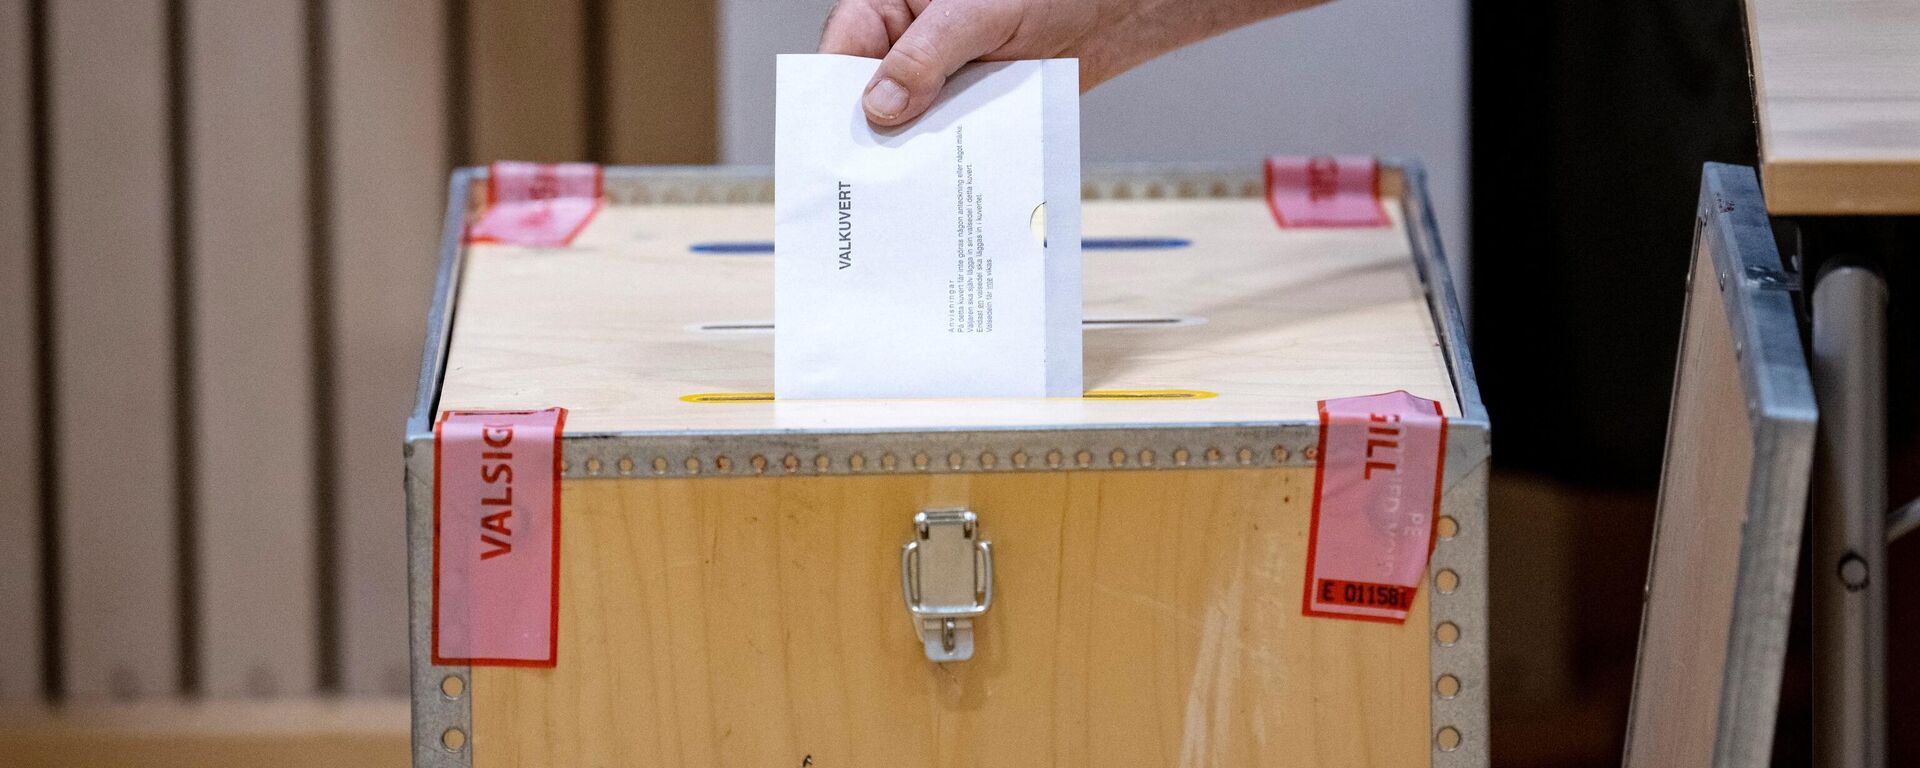 A voter casts his ballot at a polling station during Sweden's general elections in Malmo on September 11, 2022 - Sputnik International, 1920, 12.09.2022